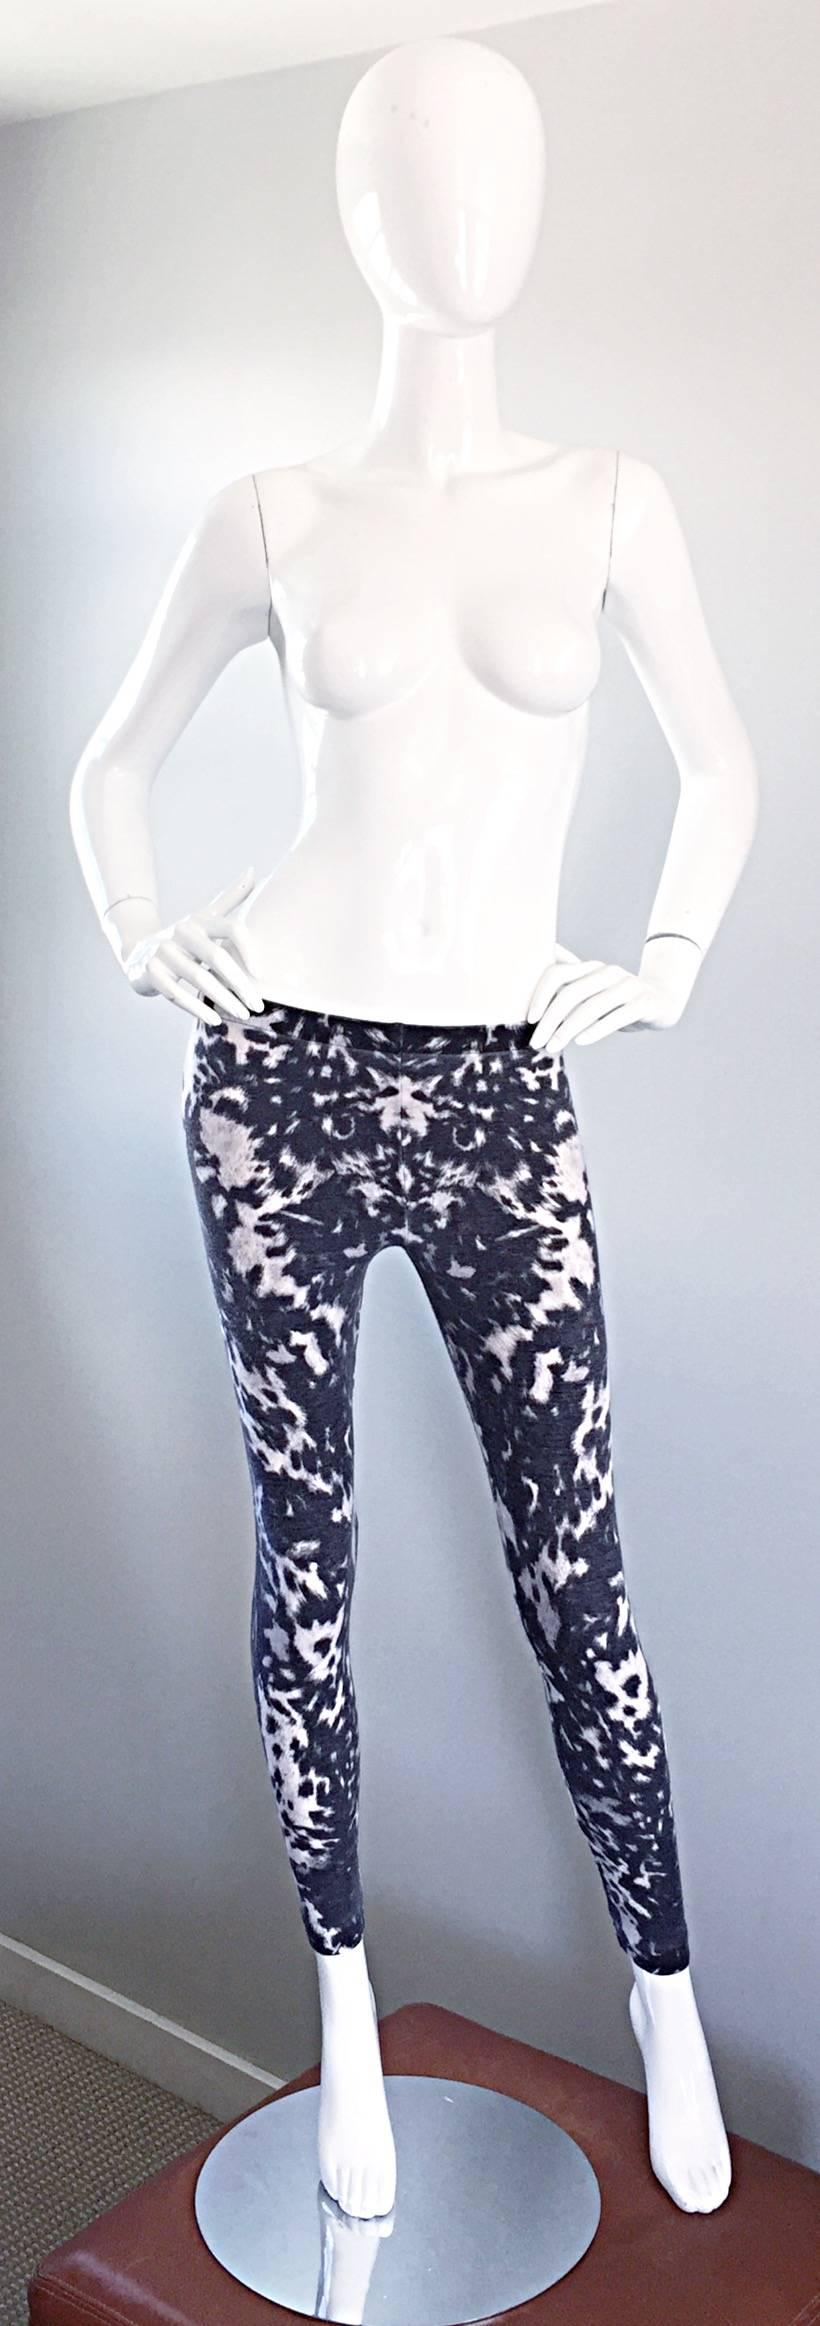 Rare early 2000s ALEXANDER MCQUEEN black and white 'pussycat crotch' wool stretch leggings! Features an allover tie dye leopard print. Amazing fit, with super soft extra virgin wool (85% wool 15% elastane). Can easily be dressed up or down. Perfect